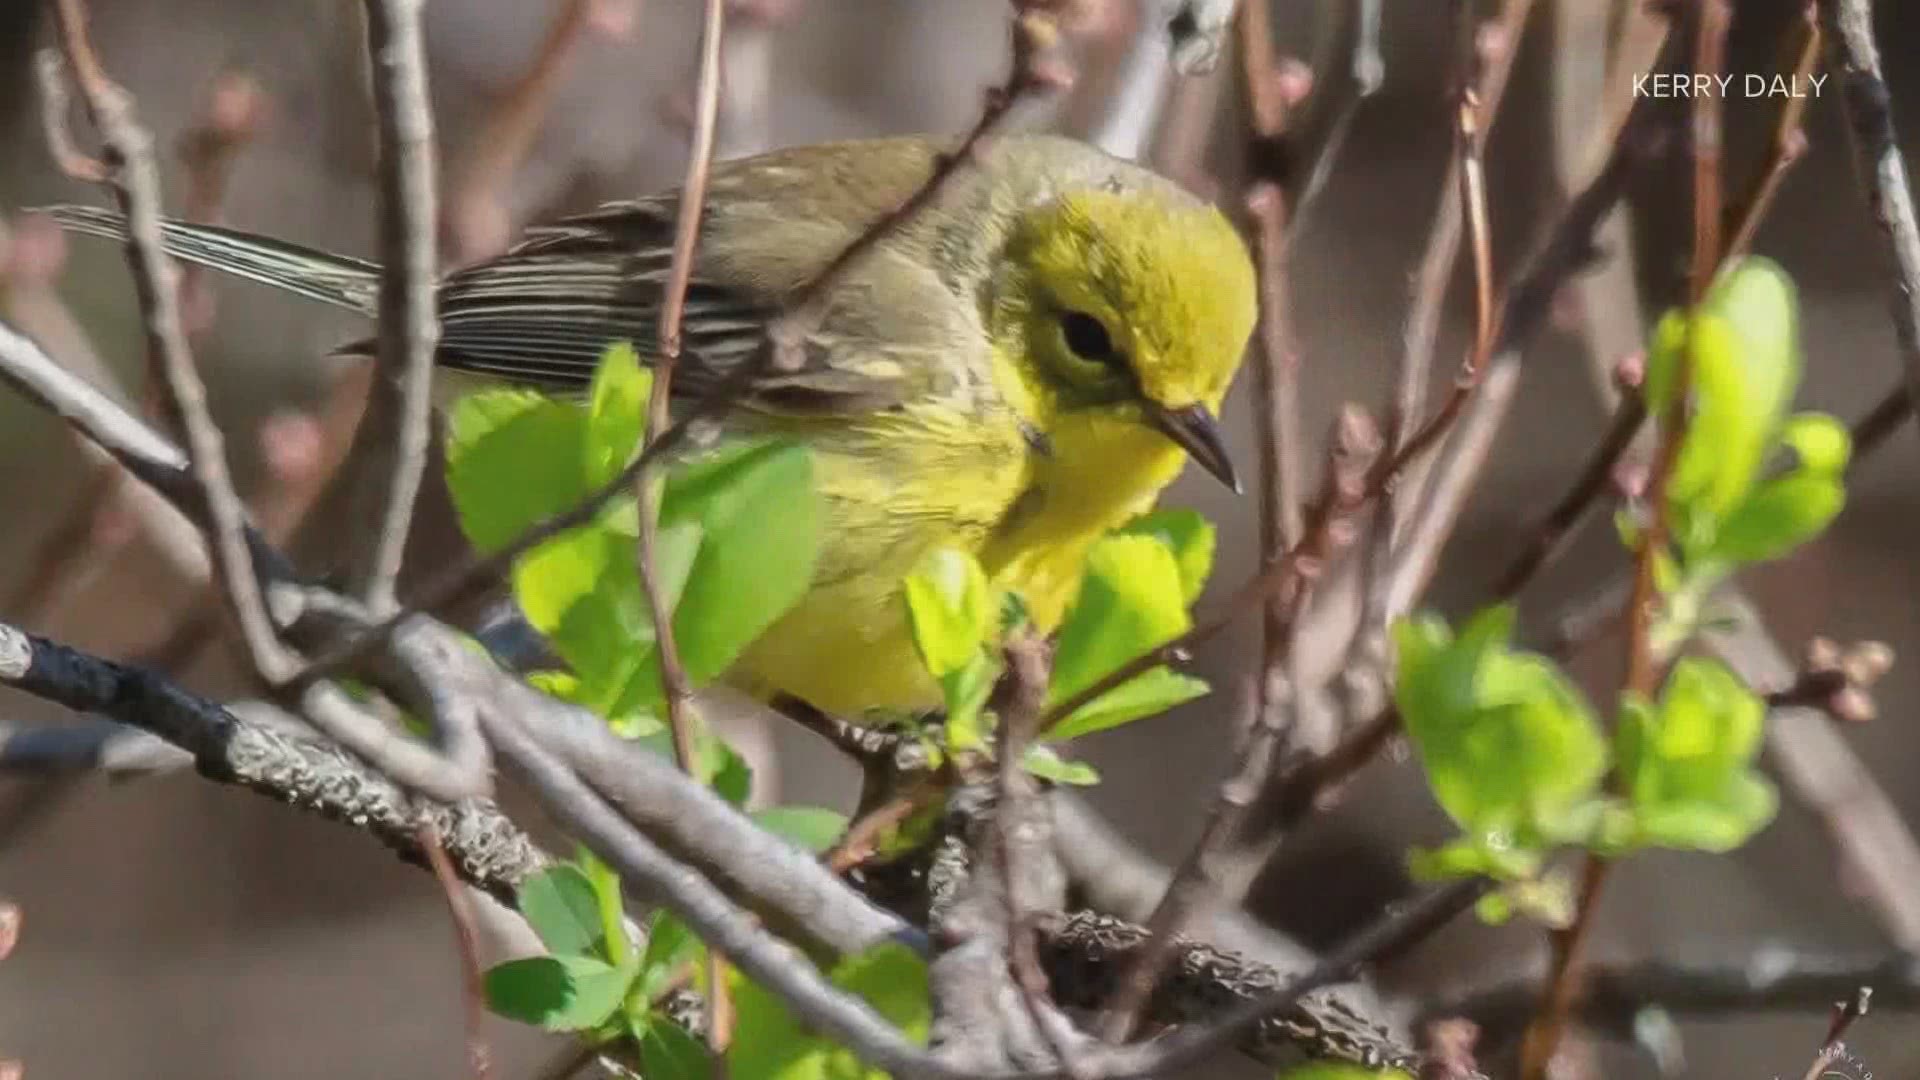 If you're not bird obsessed maybe you should me. Dan Gardoqui says listening to birds can help us connect with nature, be more mindful, and has health benefits.